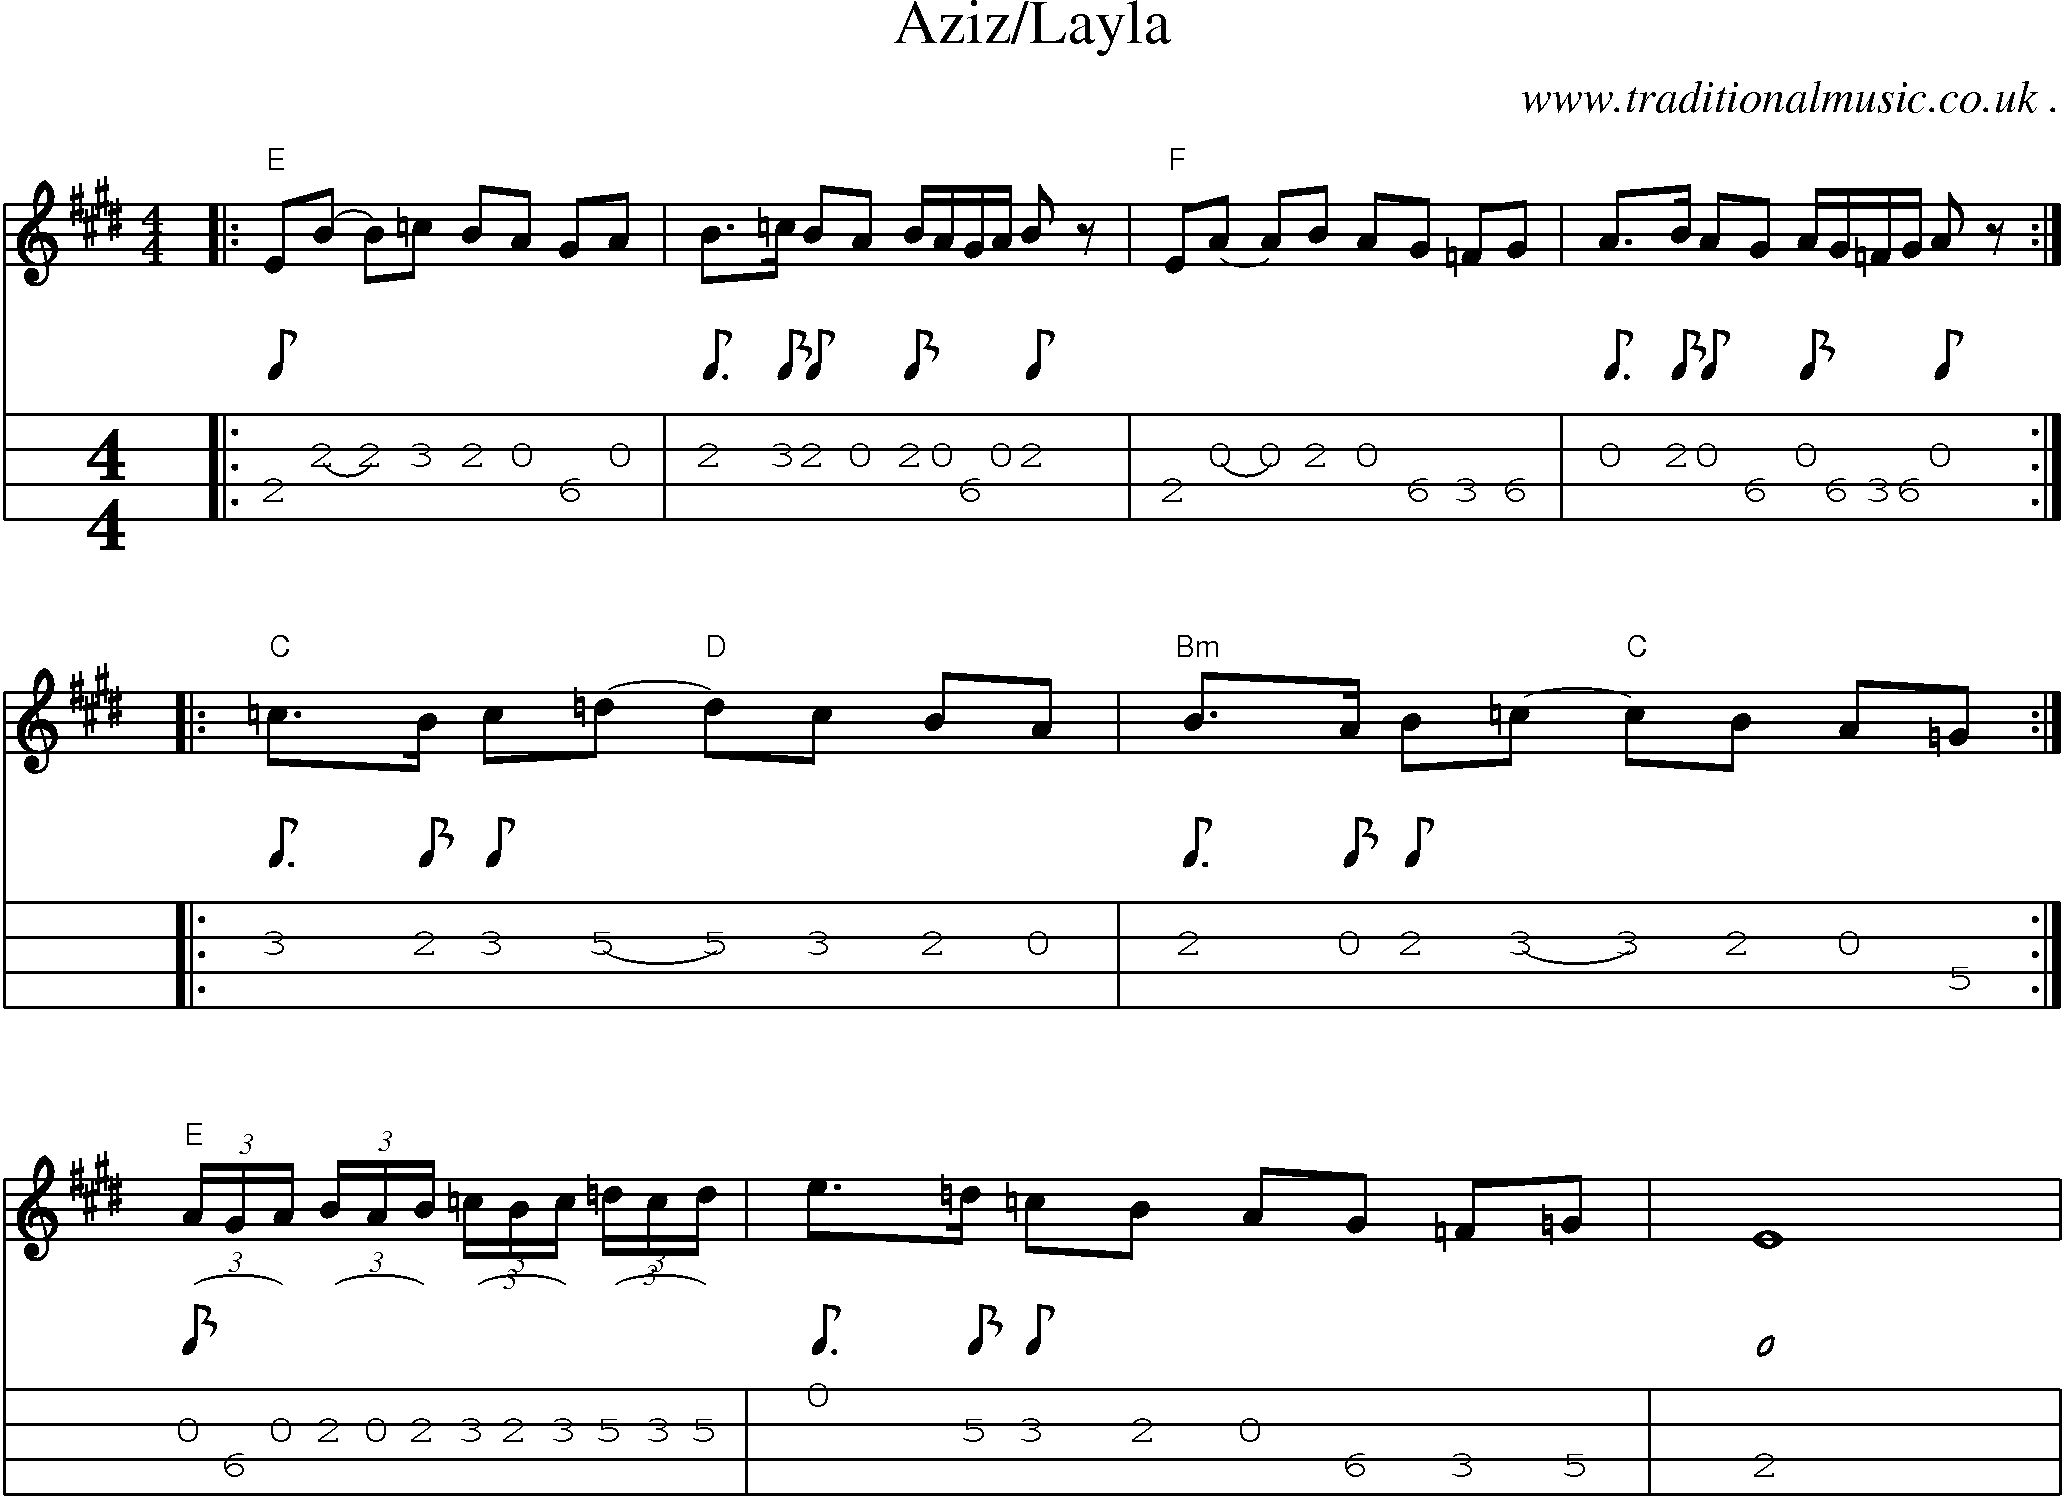 Music Score and Guitar Tabs for Azizlayla